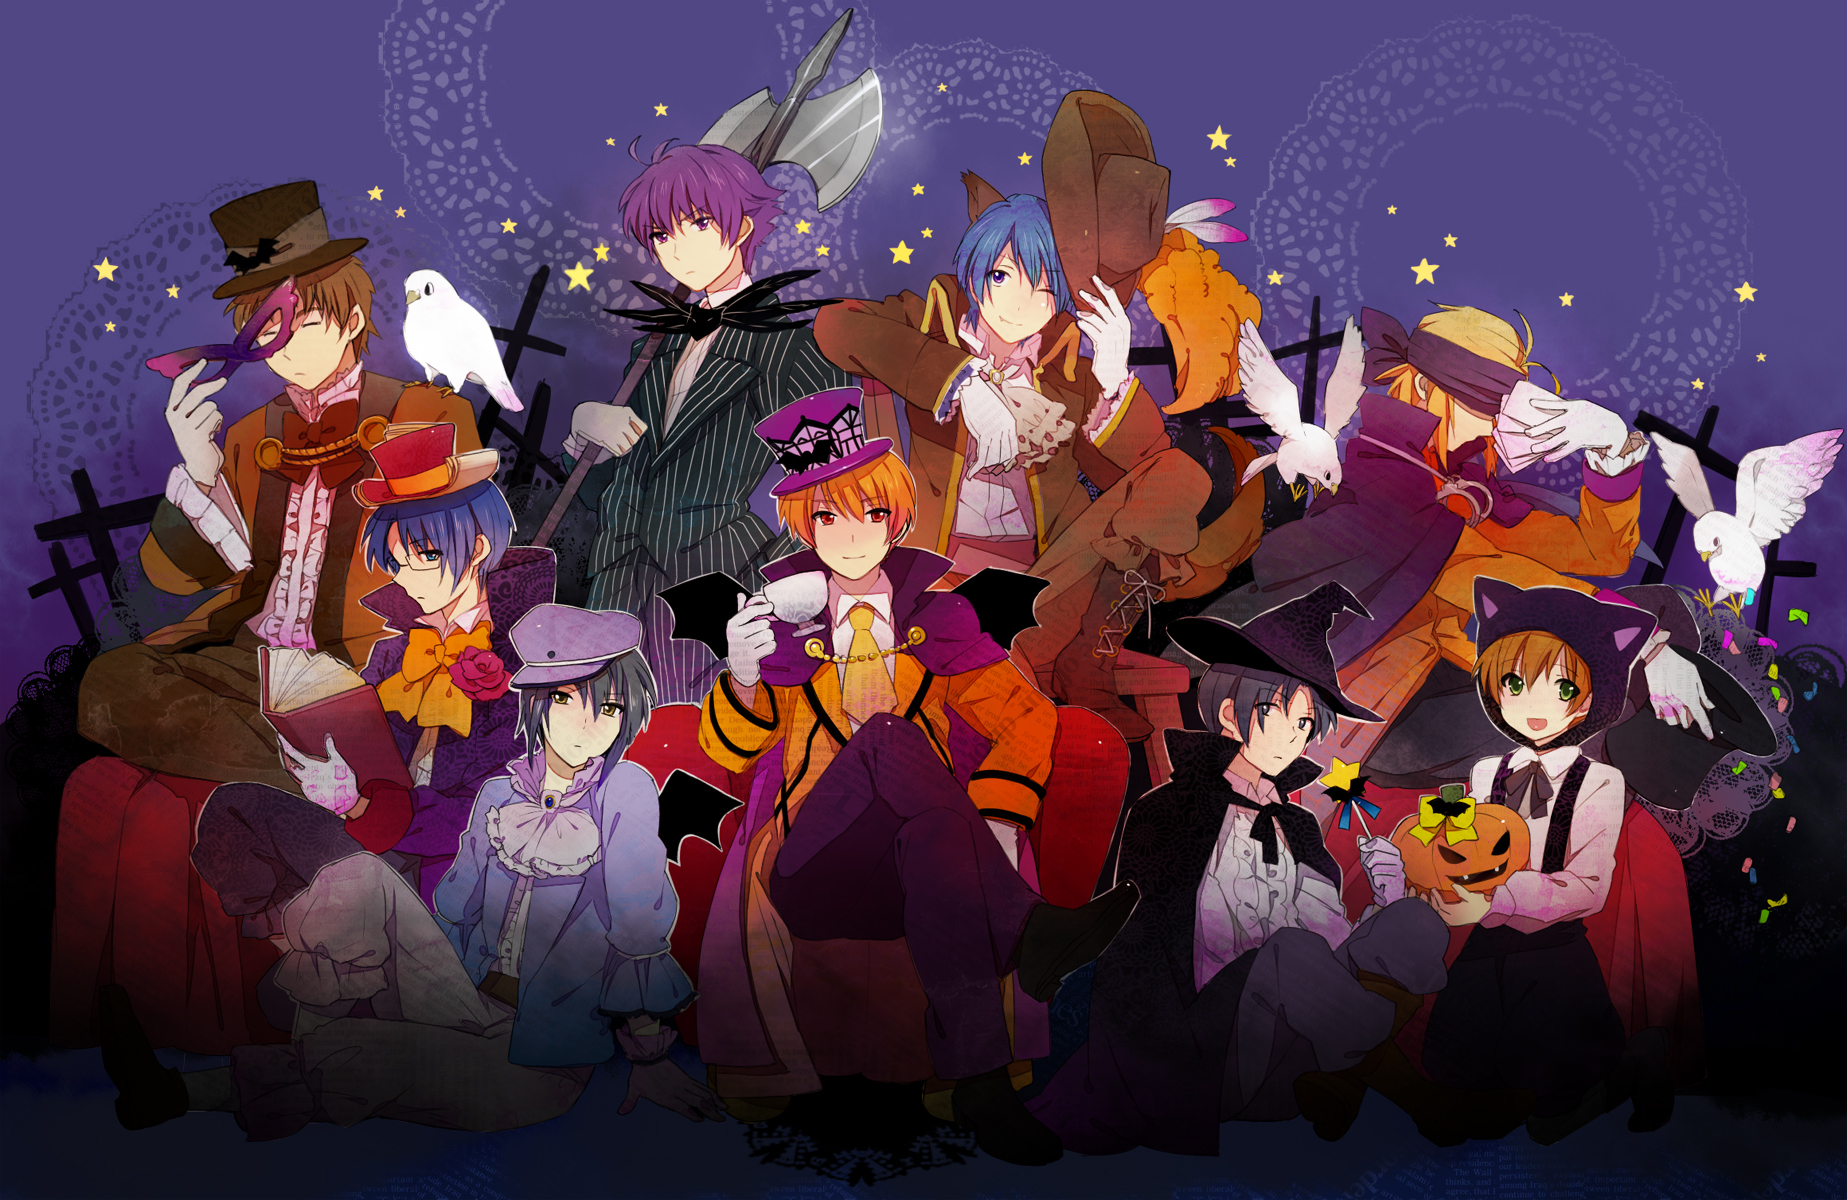 Halloween-themed anime characters gathered together for a group photo